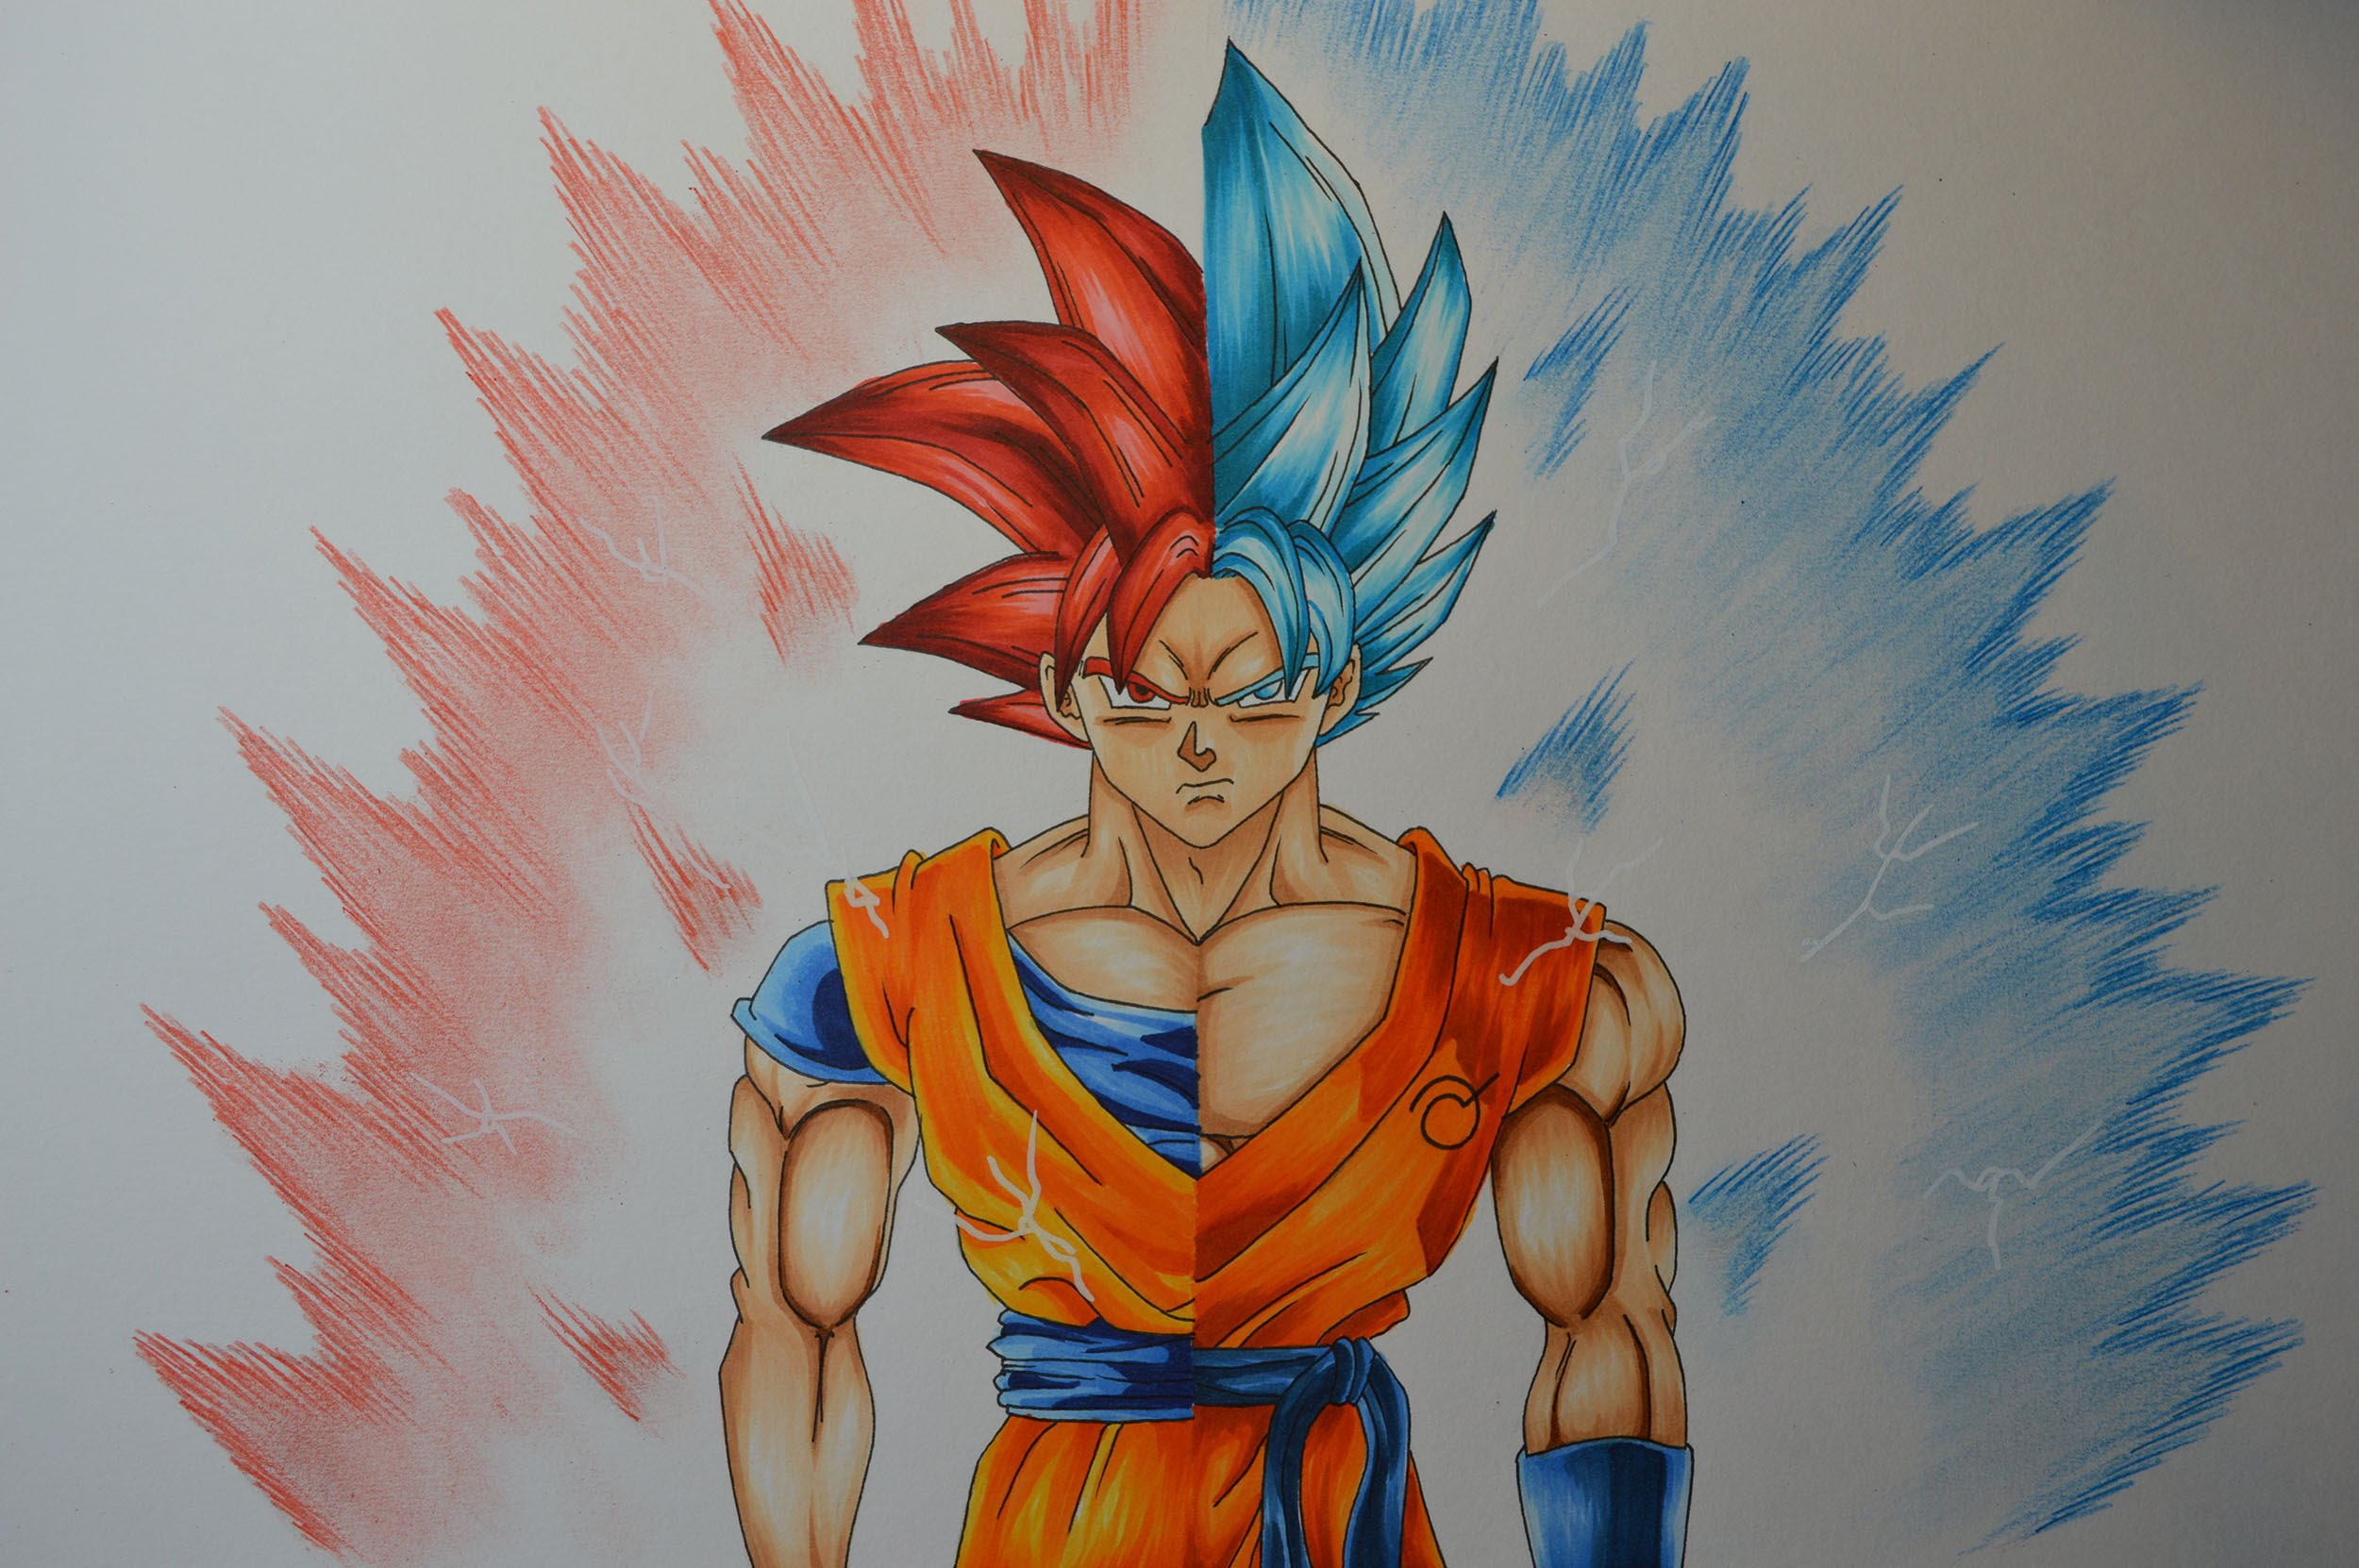 How To Draw Goku Super Saiyan 4 "How To" Images Collection